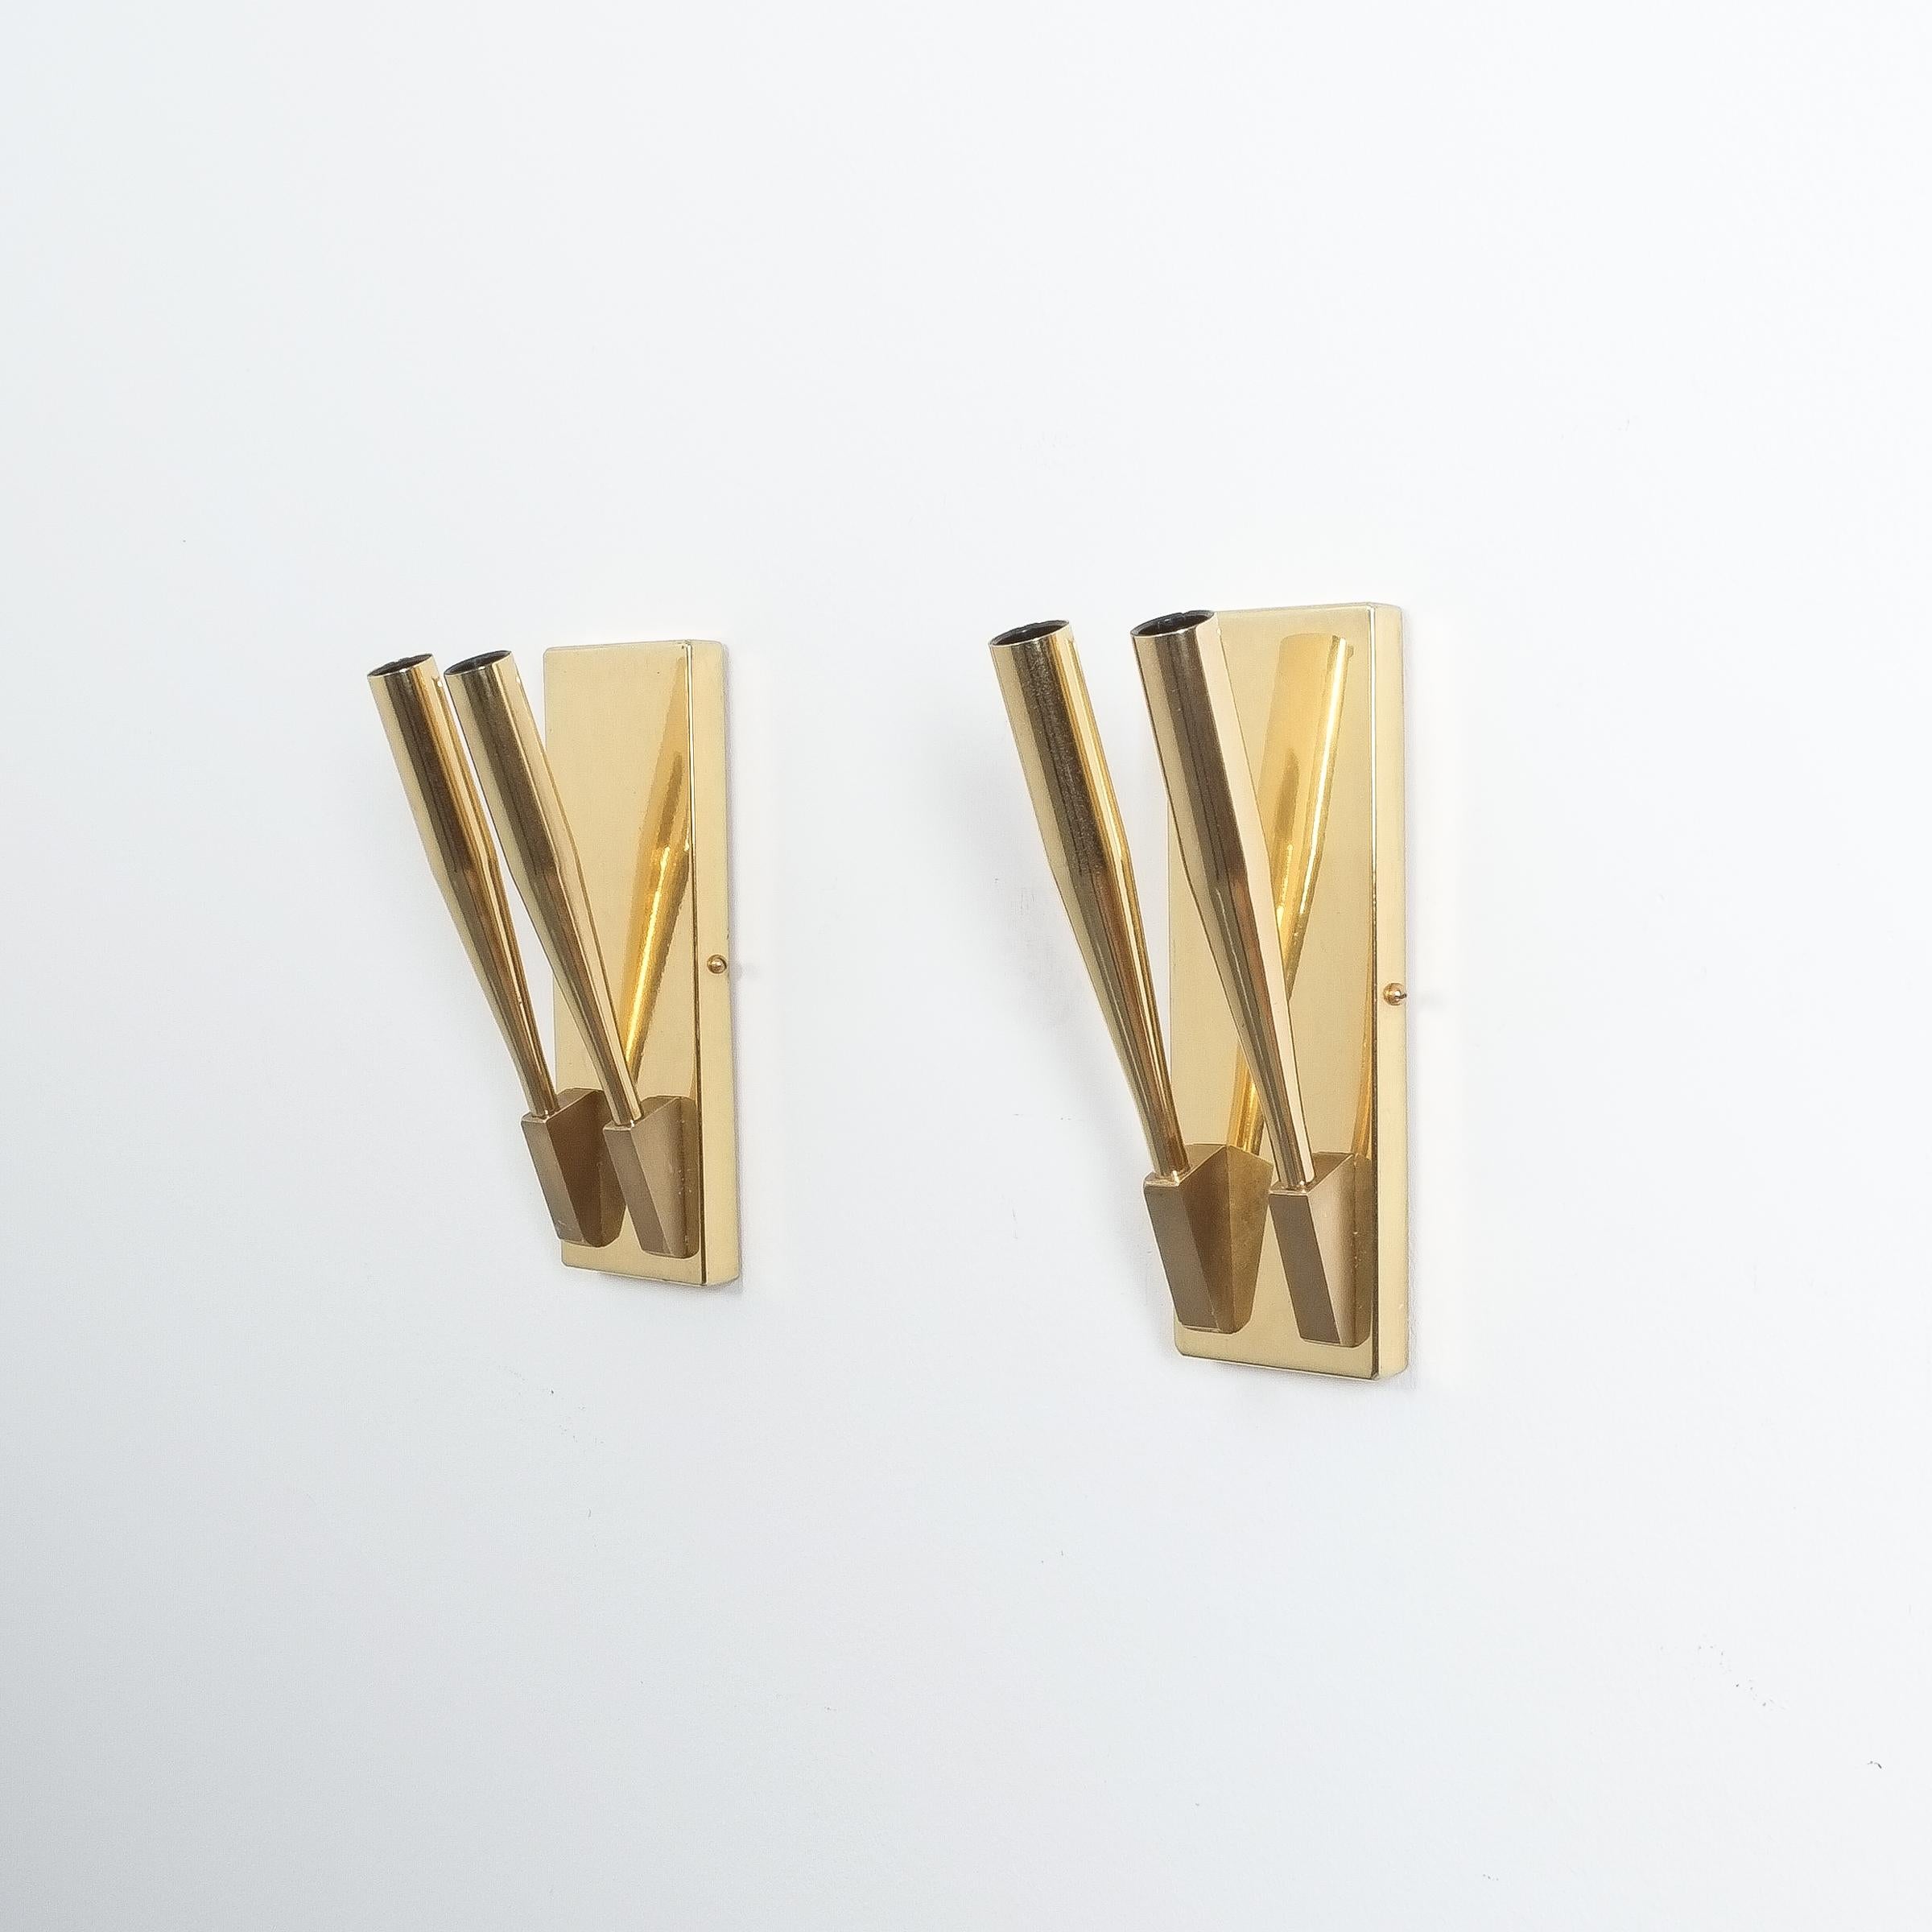 Brass sconces attributed Gio Ponti, Italy circa 1955. Minimalistic polished brass sconces, newly polished and wired, 2 bulbs e14 per lamp. Very good condition.